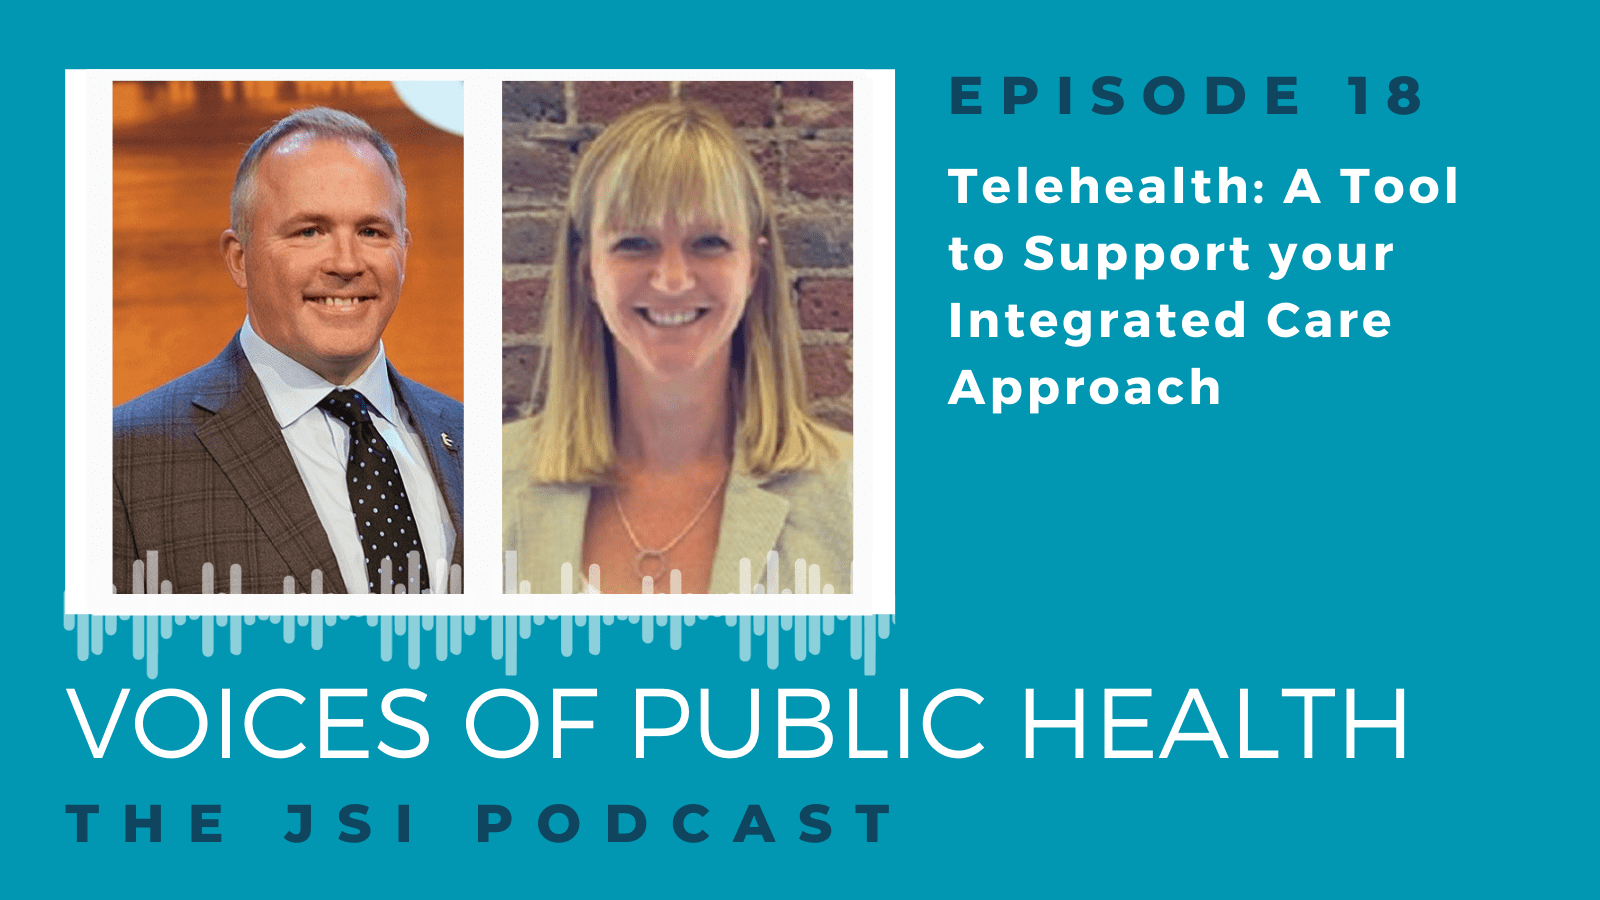 Telehealth: A tool to support your integrated care approach